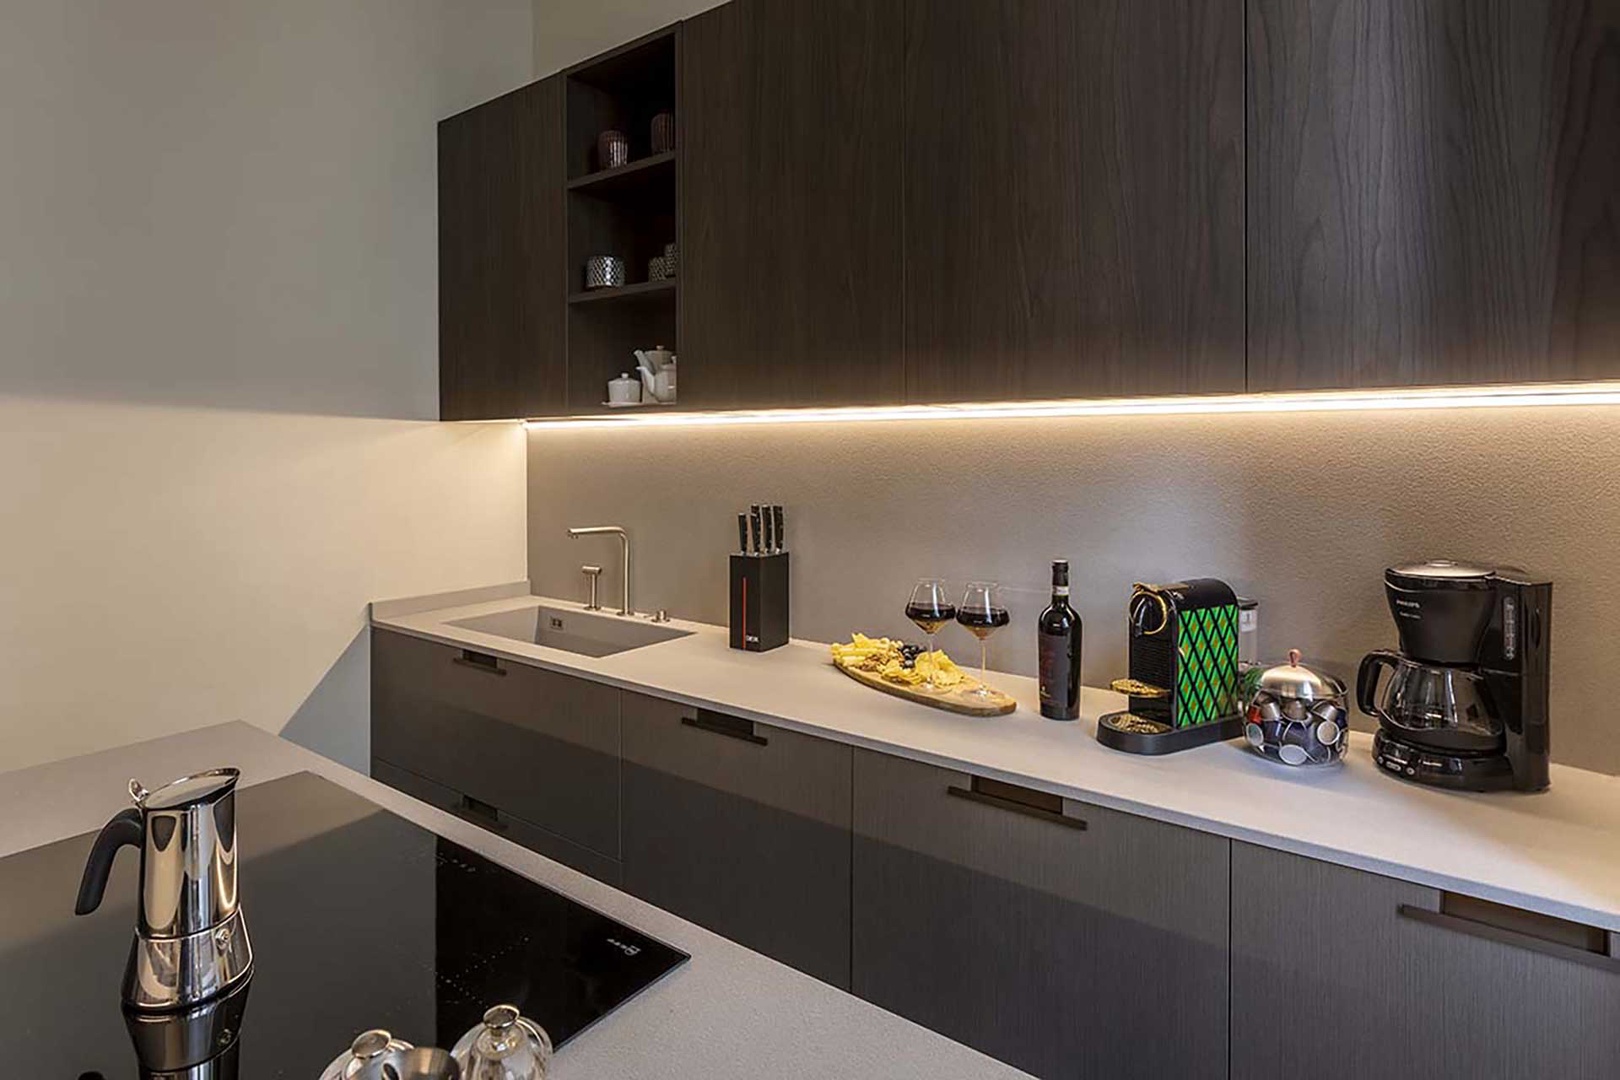 Modern and well designed kitchen perfecting for preparing meals.